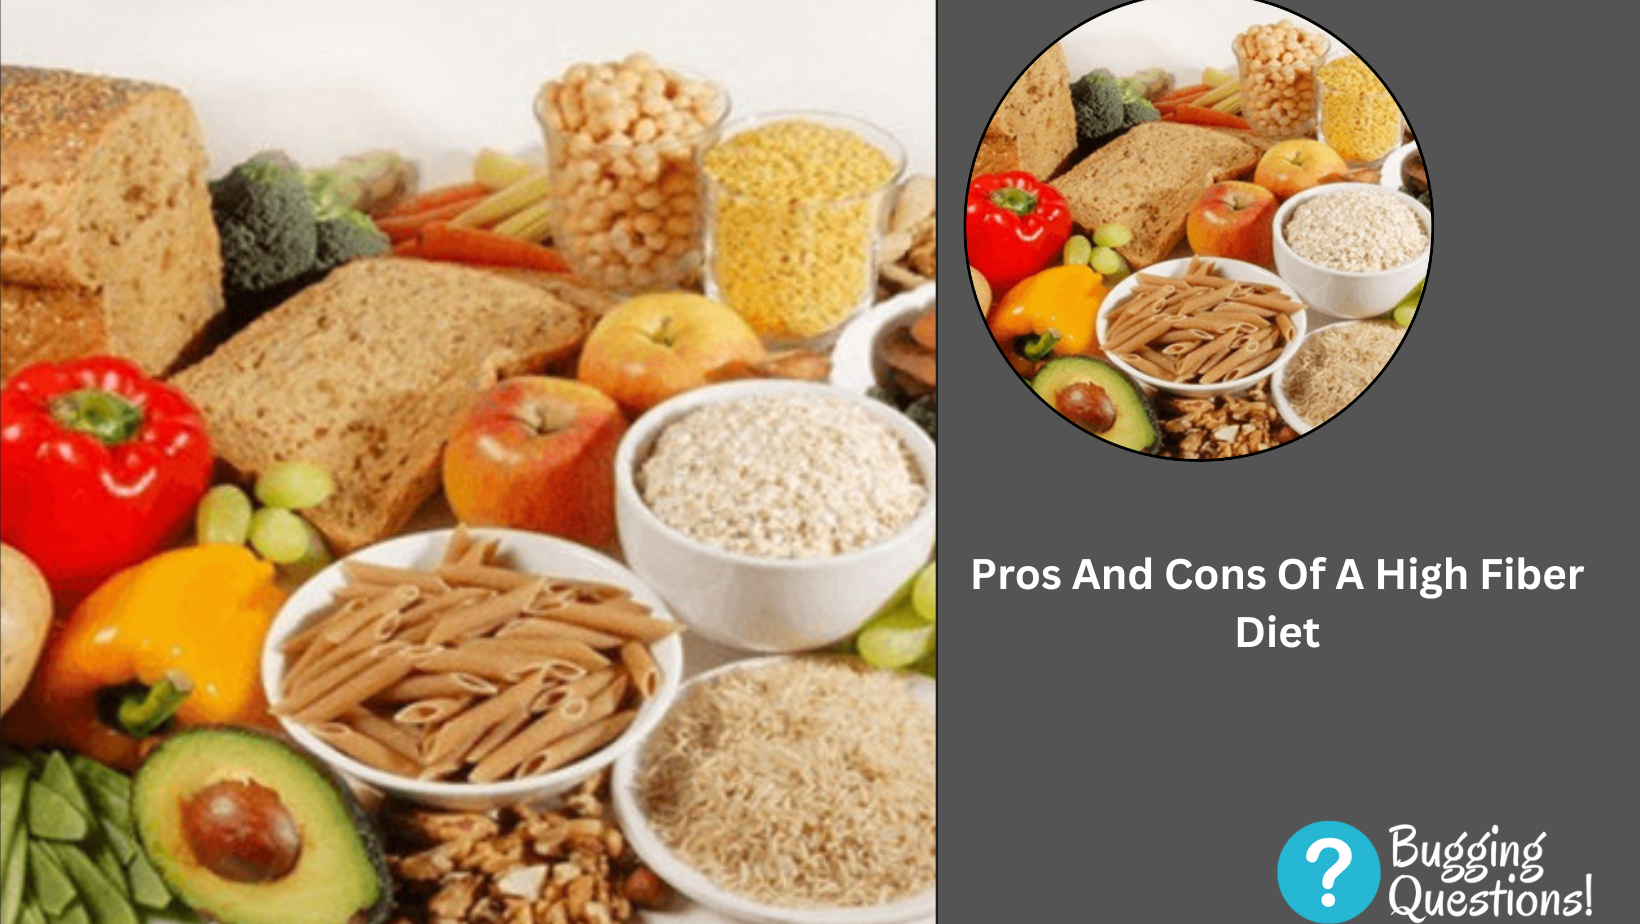 Pros And Cons Of A High Fiber Diet